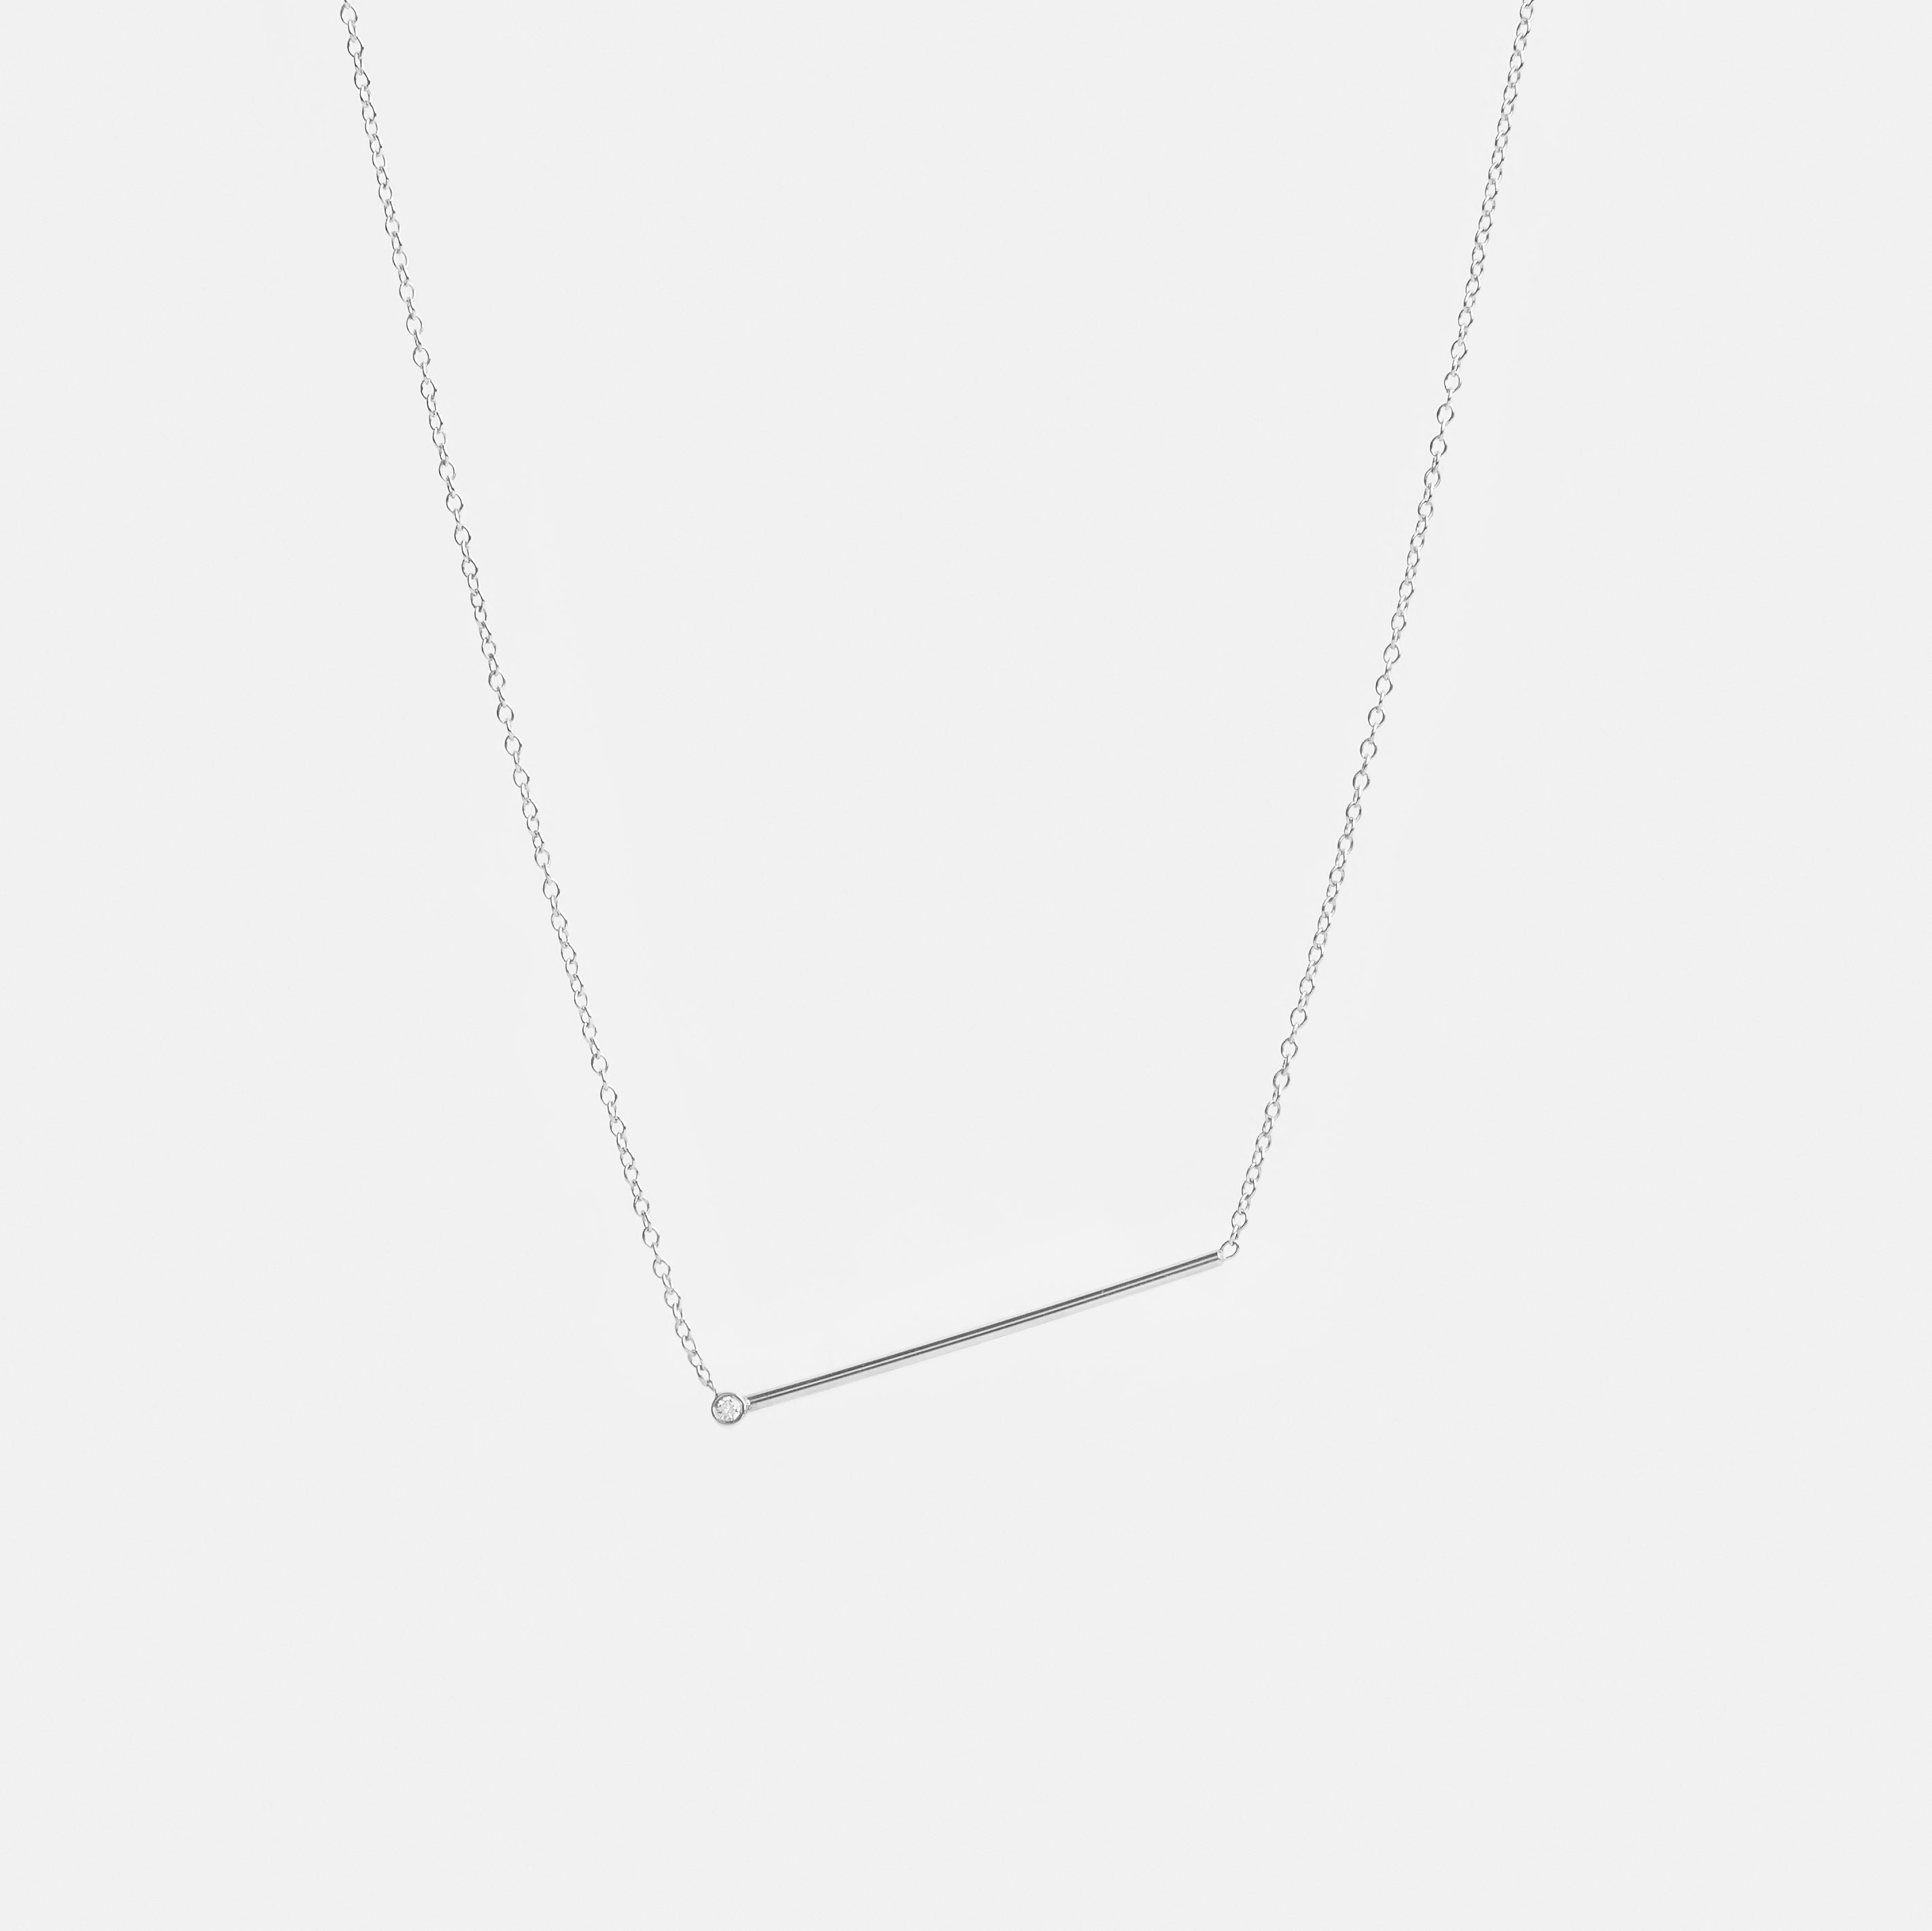 Enne Unusual Necklace in Sterling Silver set with White Diamond By SHW Fine Jewelry NYC